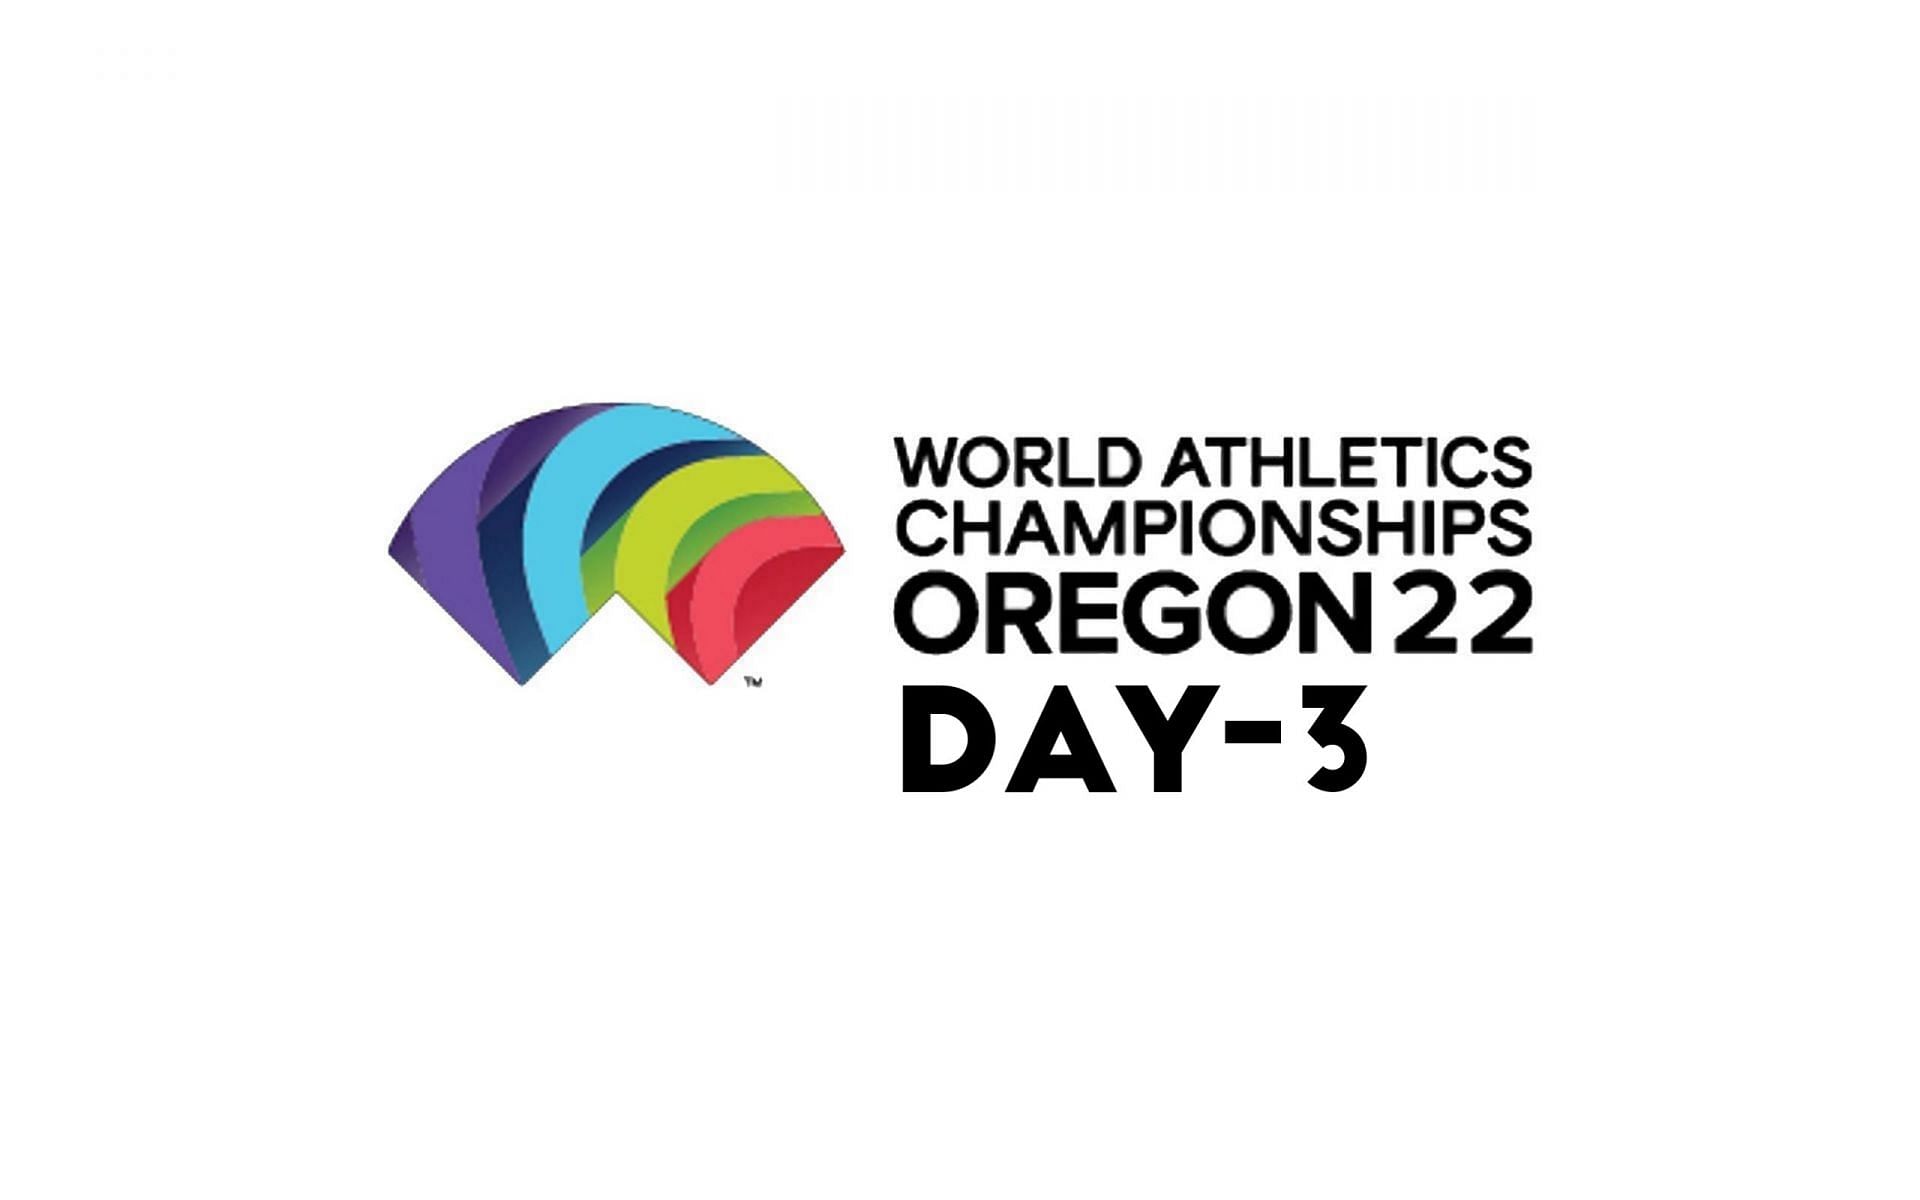 Day 3 of the World Athletics Championship is all set to take place on July 17, 2022 (Image via Sportskeeda)